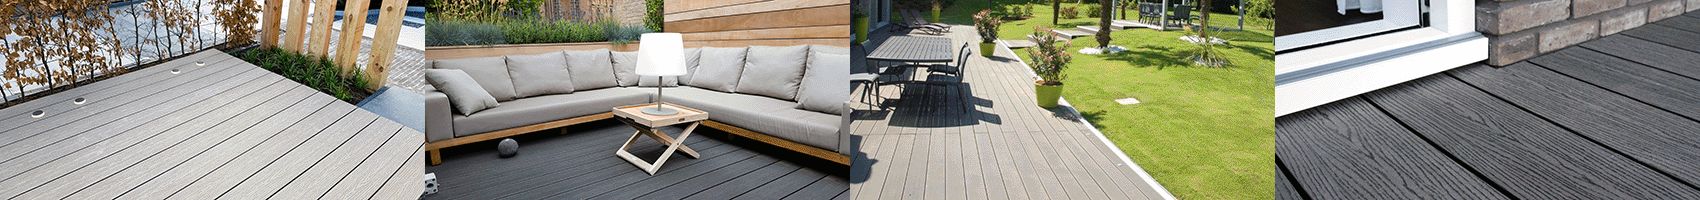 148mm Black Double Faced WPC Decking 3m 